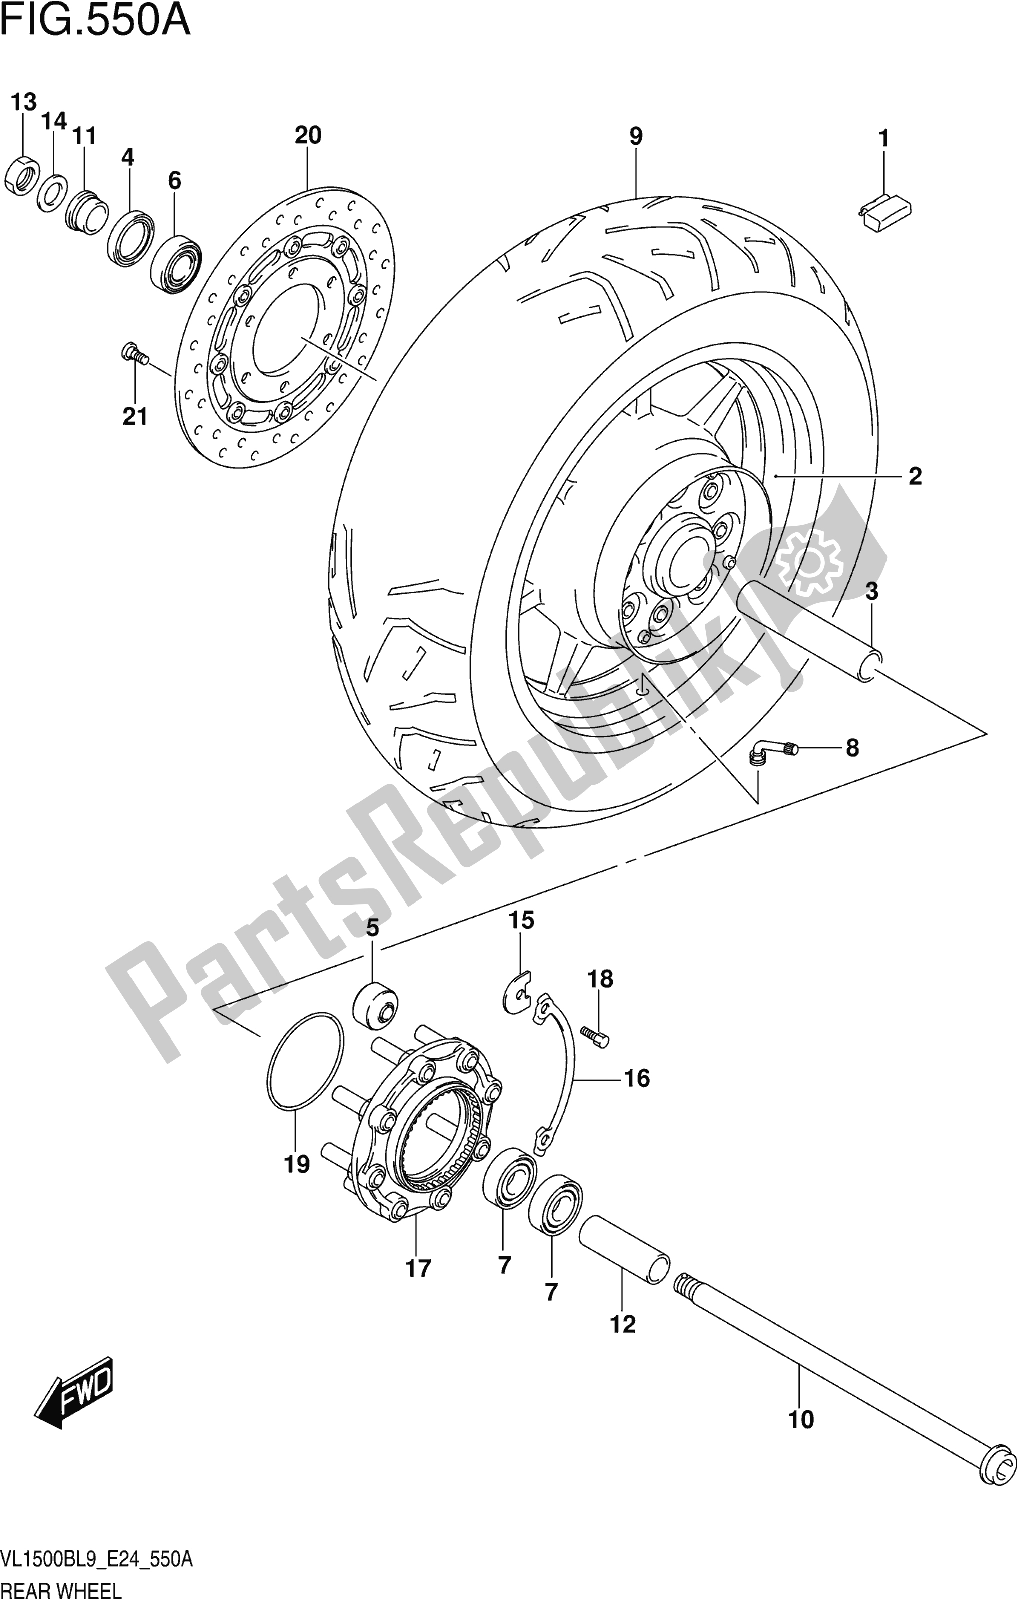 All parts for the Fig. 550a Rear Wheel of the Suzuki VL 1500B 2019